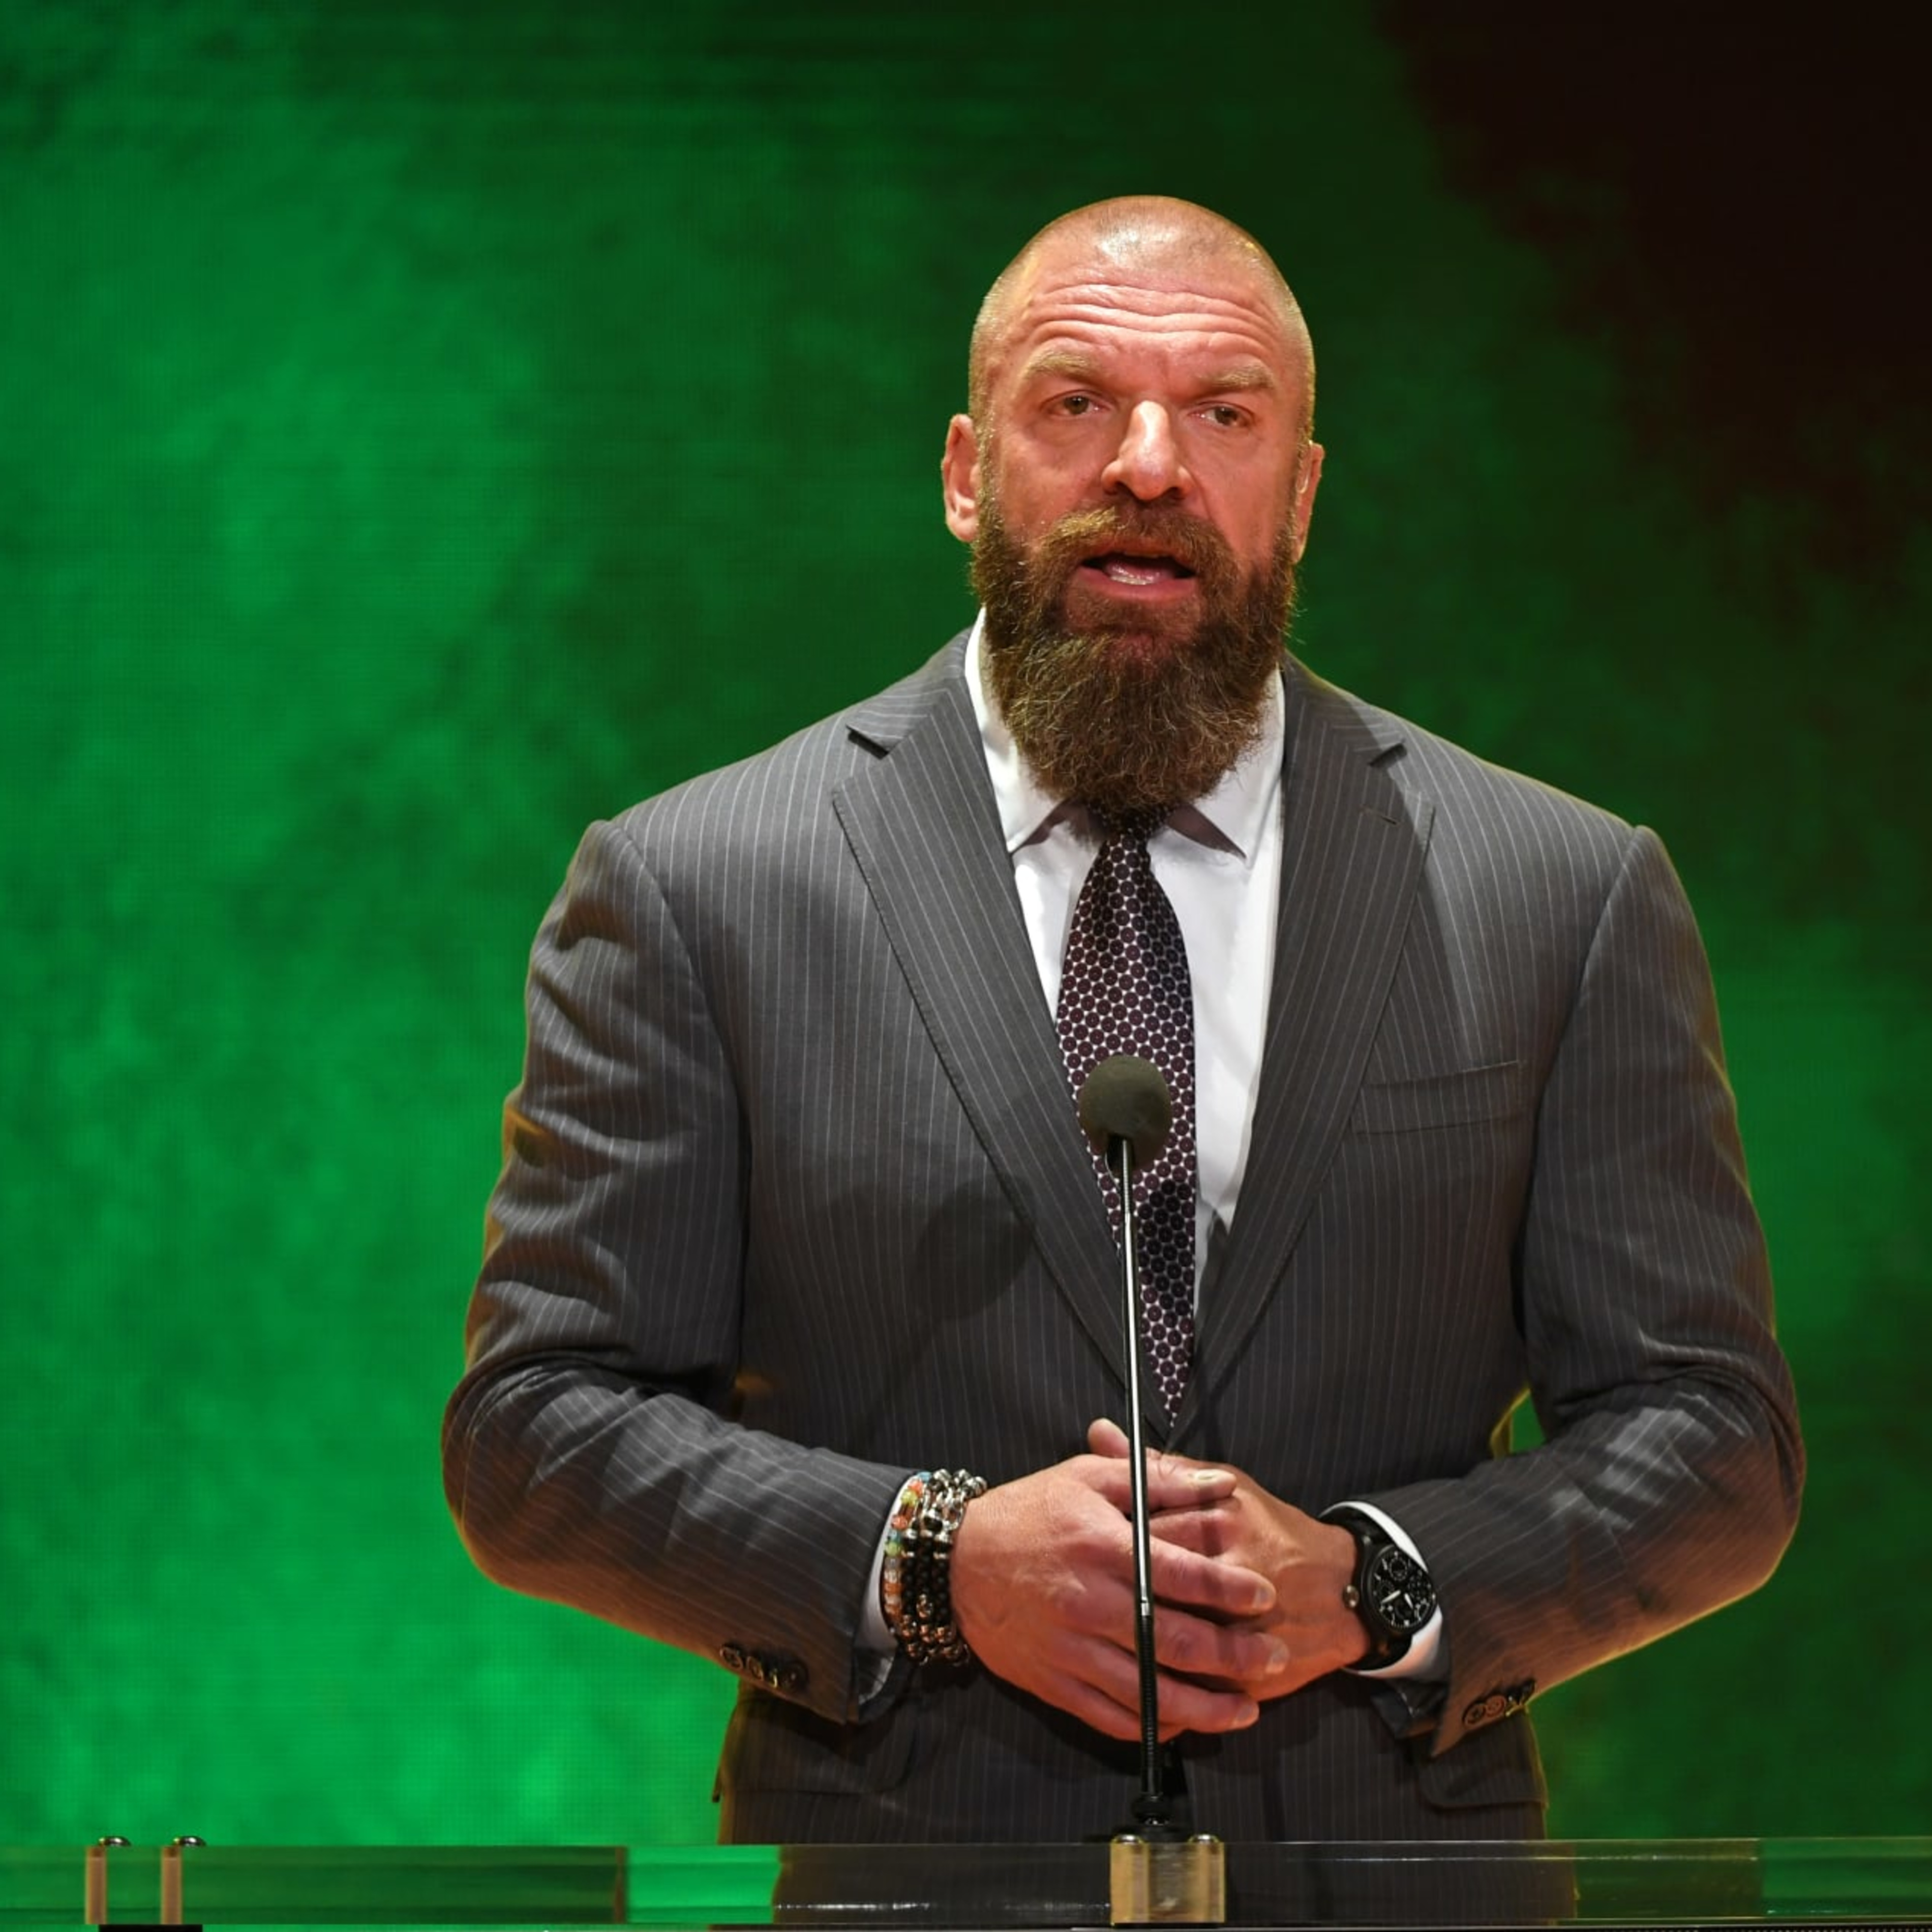 Triple H Returns to WWE as Executive VP of Talent After Heart Issues